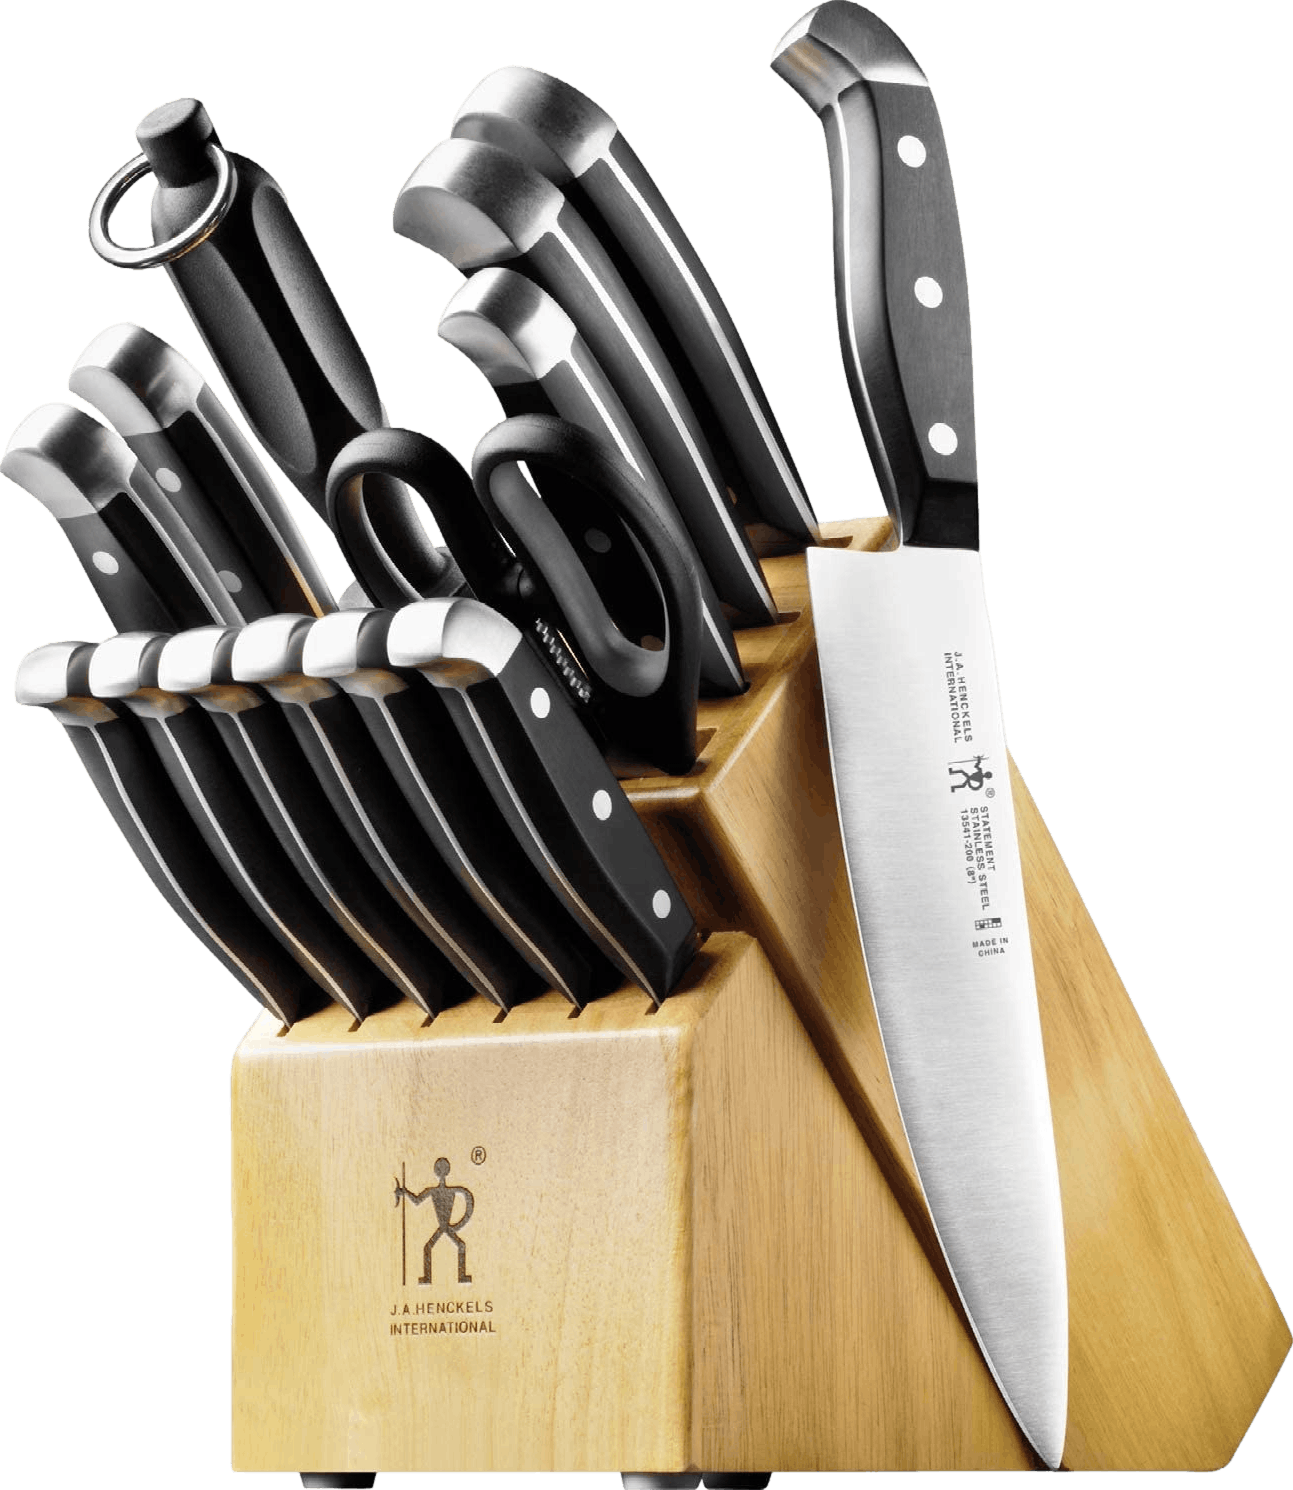 Henckels Statement 2-pc Asian Knife Set, 2-pc - Fry's Food Stores